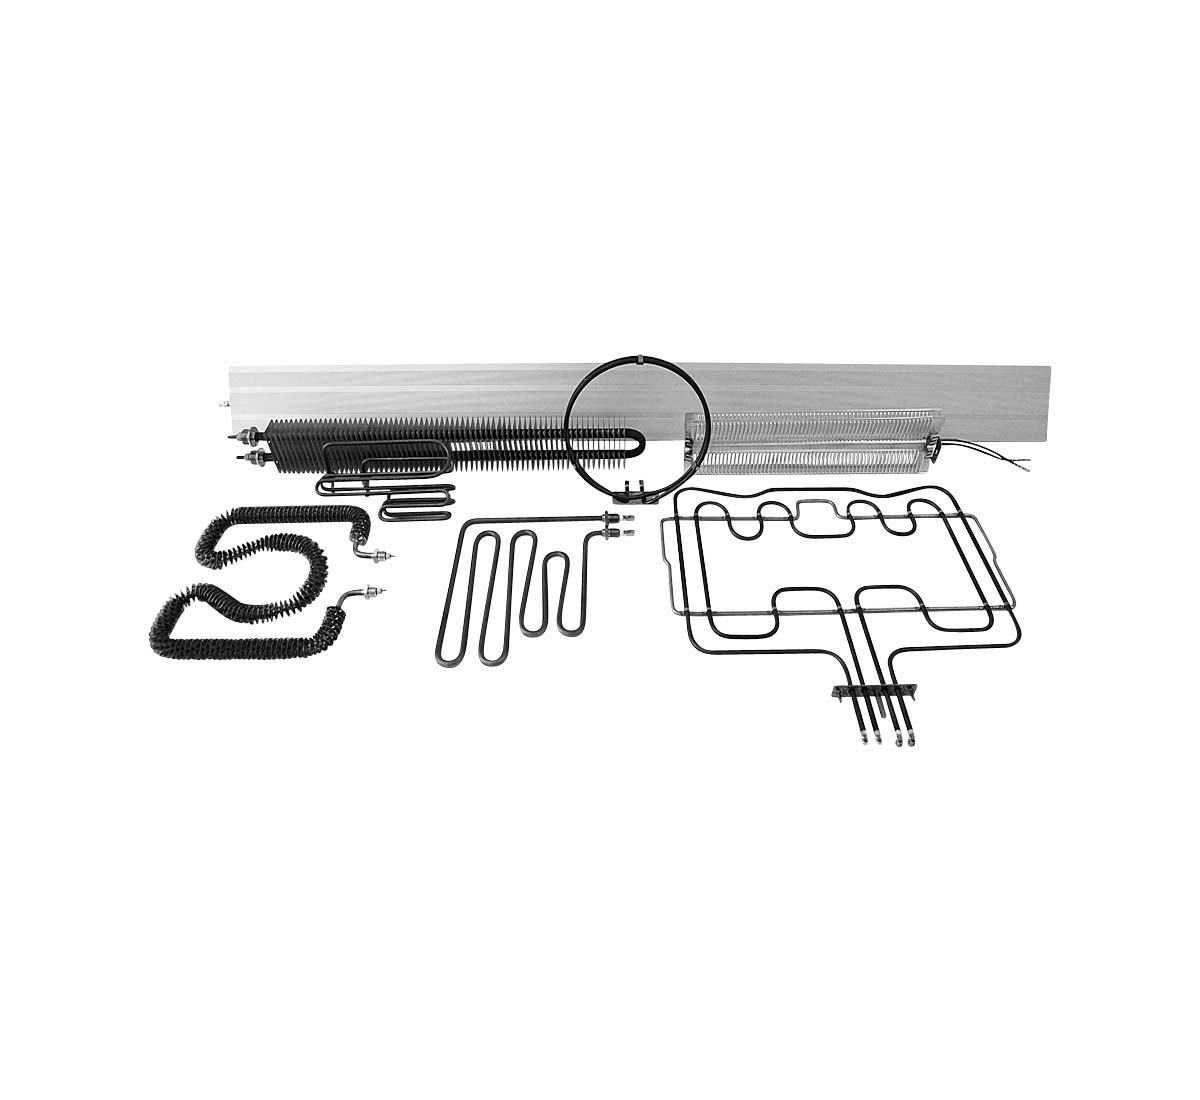 A picture of different tubular air heating elements